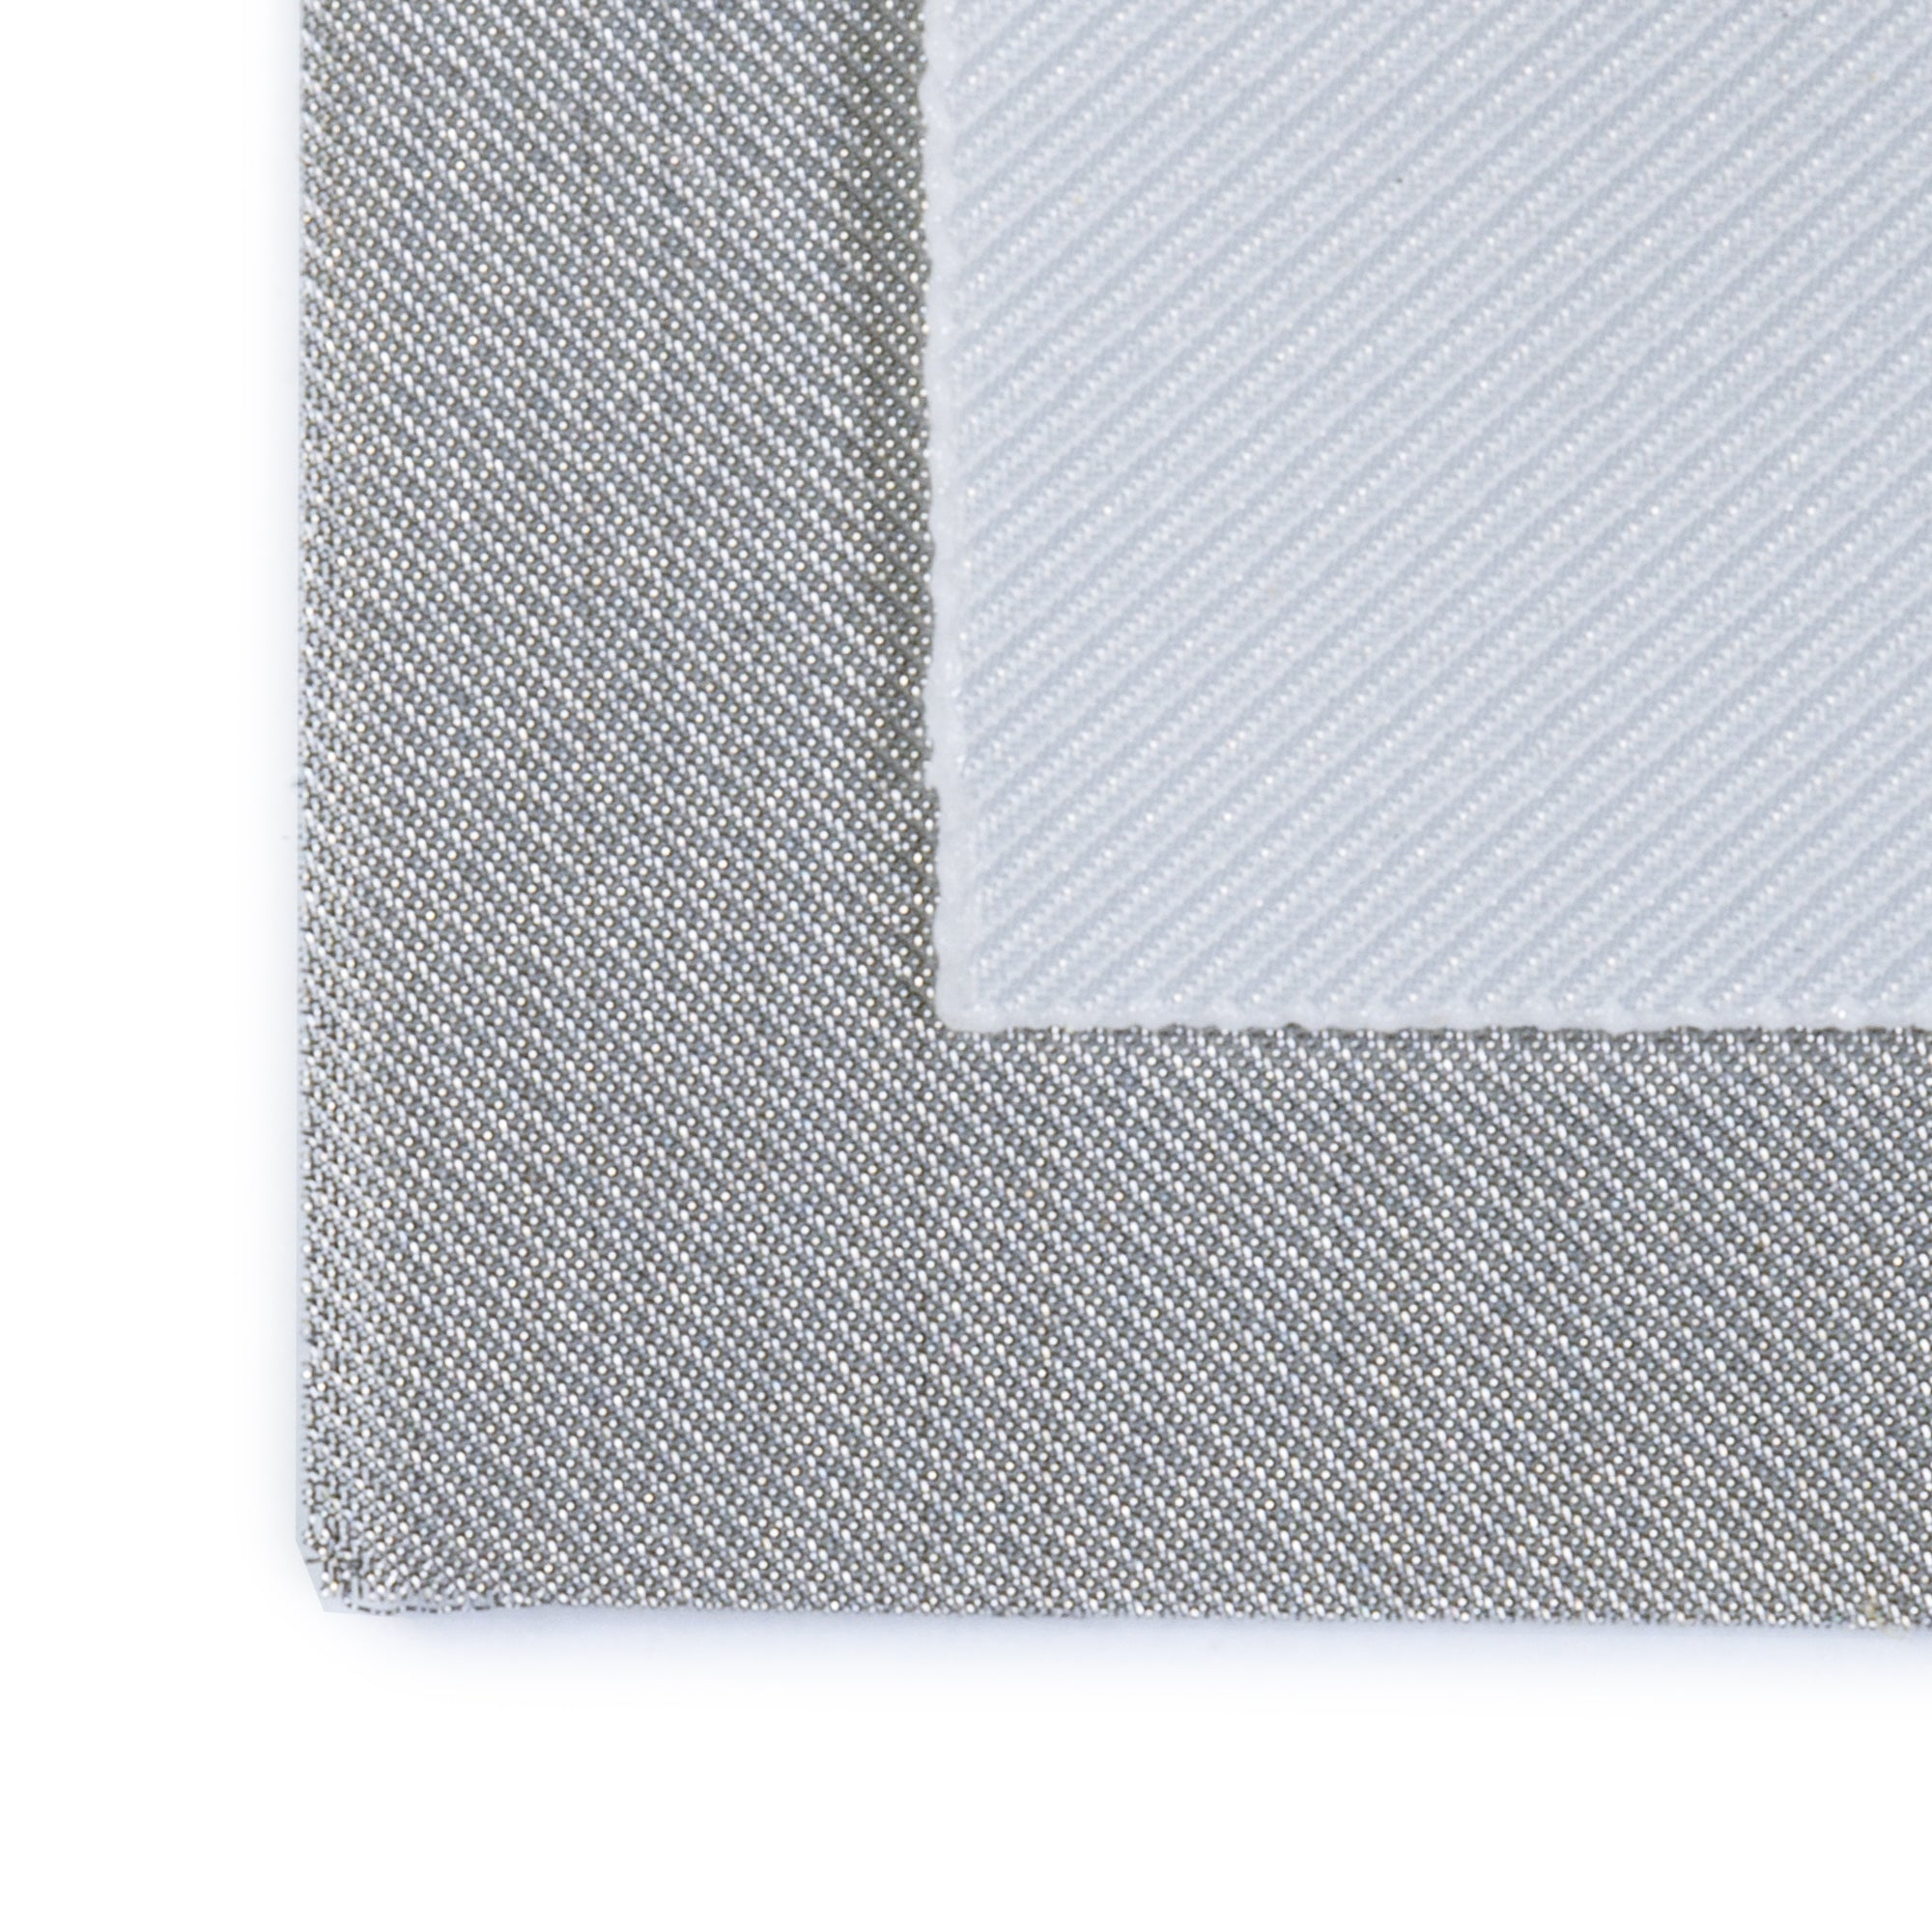 5 Micron Nylon Mesh Sheets  For Mechanical Separations & Fractioning